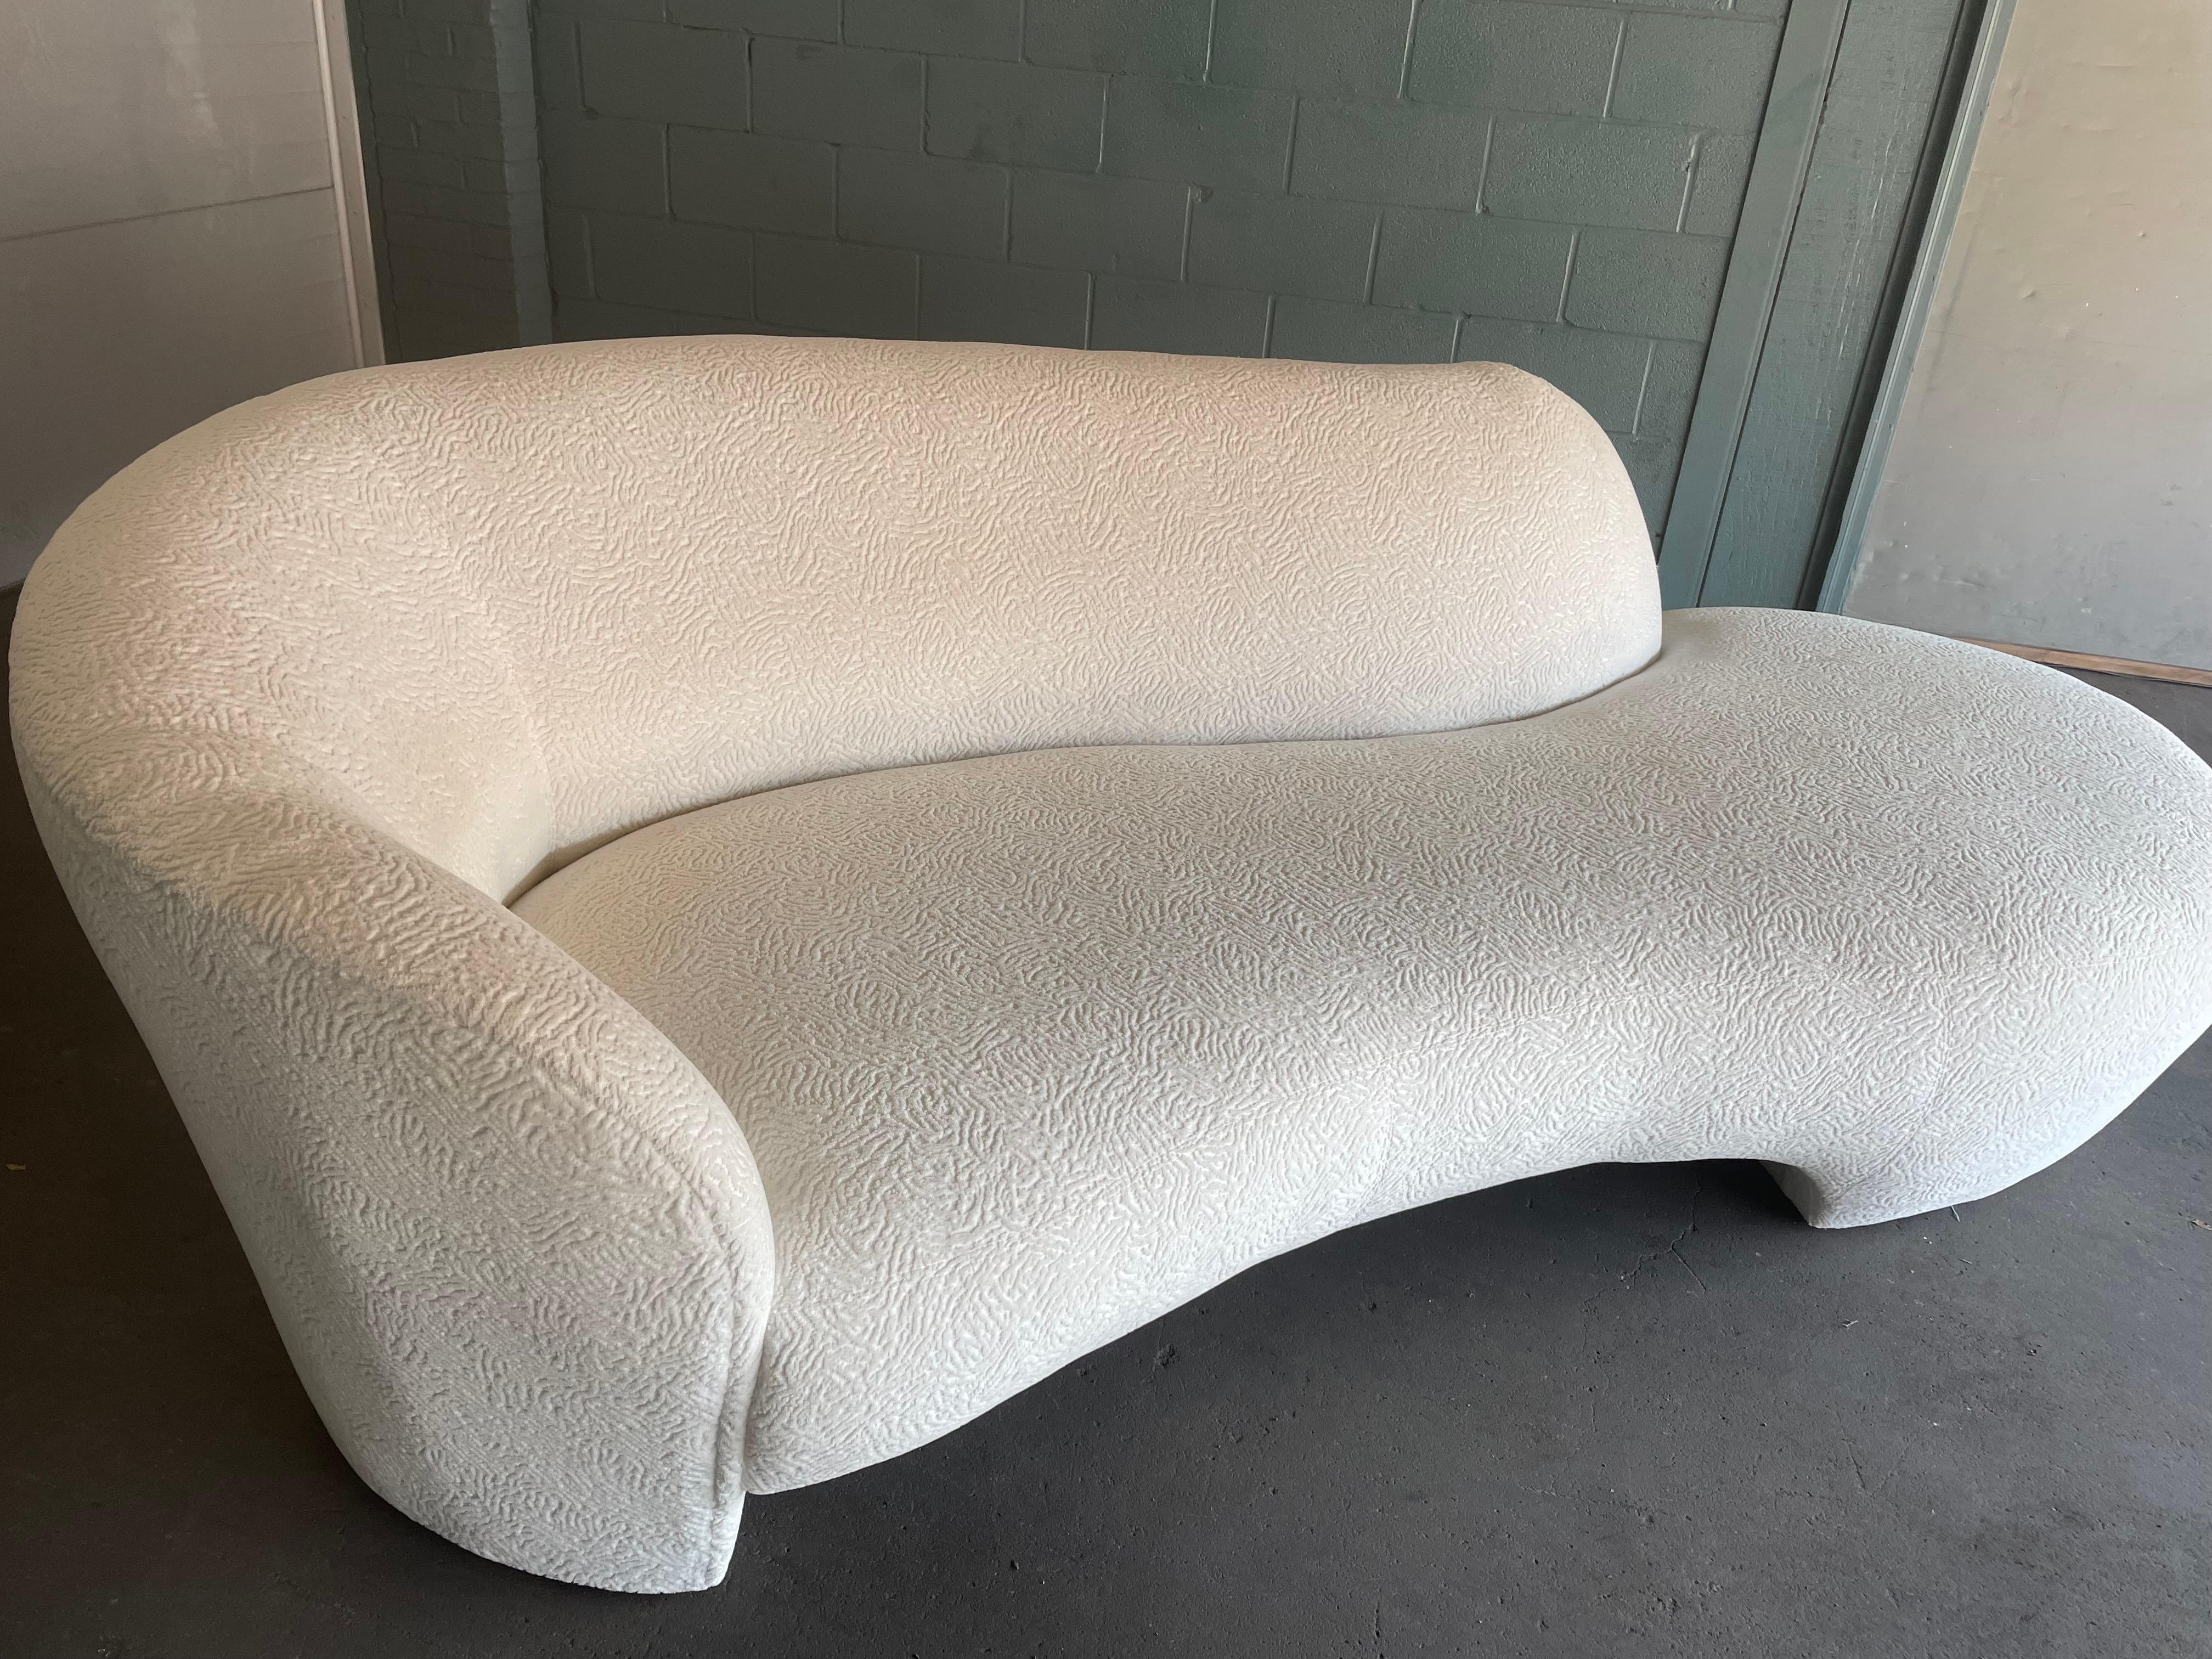 Sexy and classic chaise lounge in beautiful condition. The pure white fabic is soft and feels beautiful to the touch. Sofa has been professionally deep cleaned and proof is available upon request.
And although professionally cleaned, there is